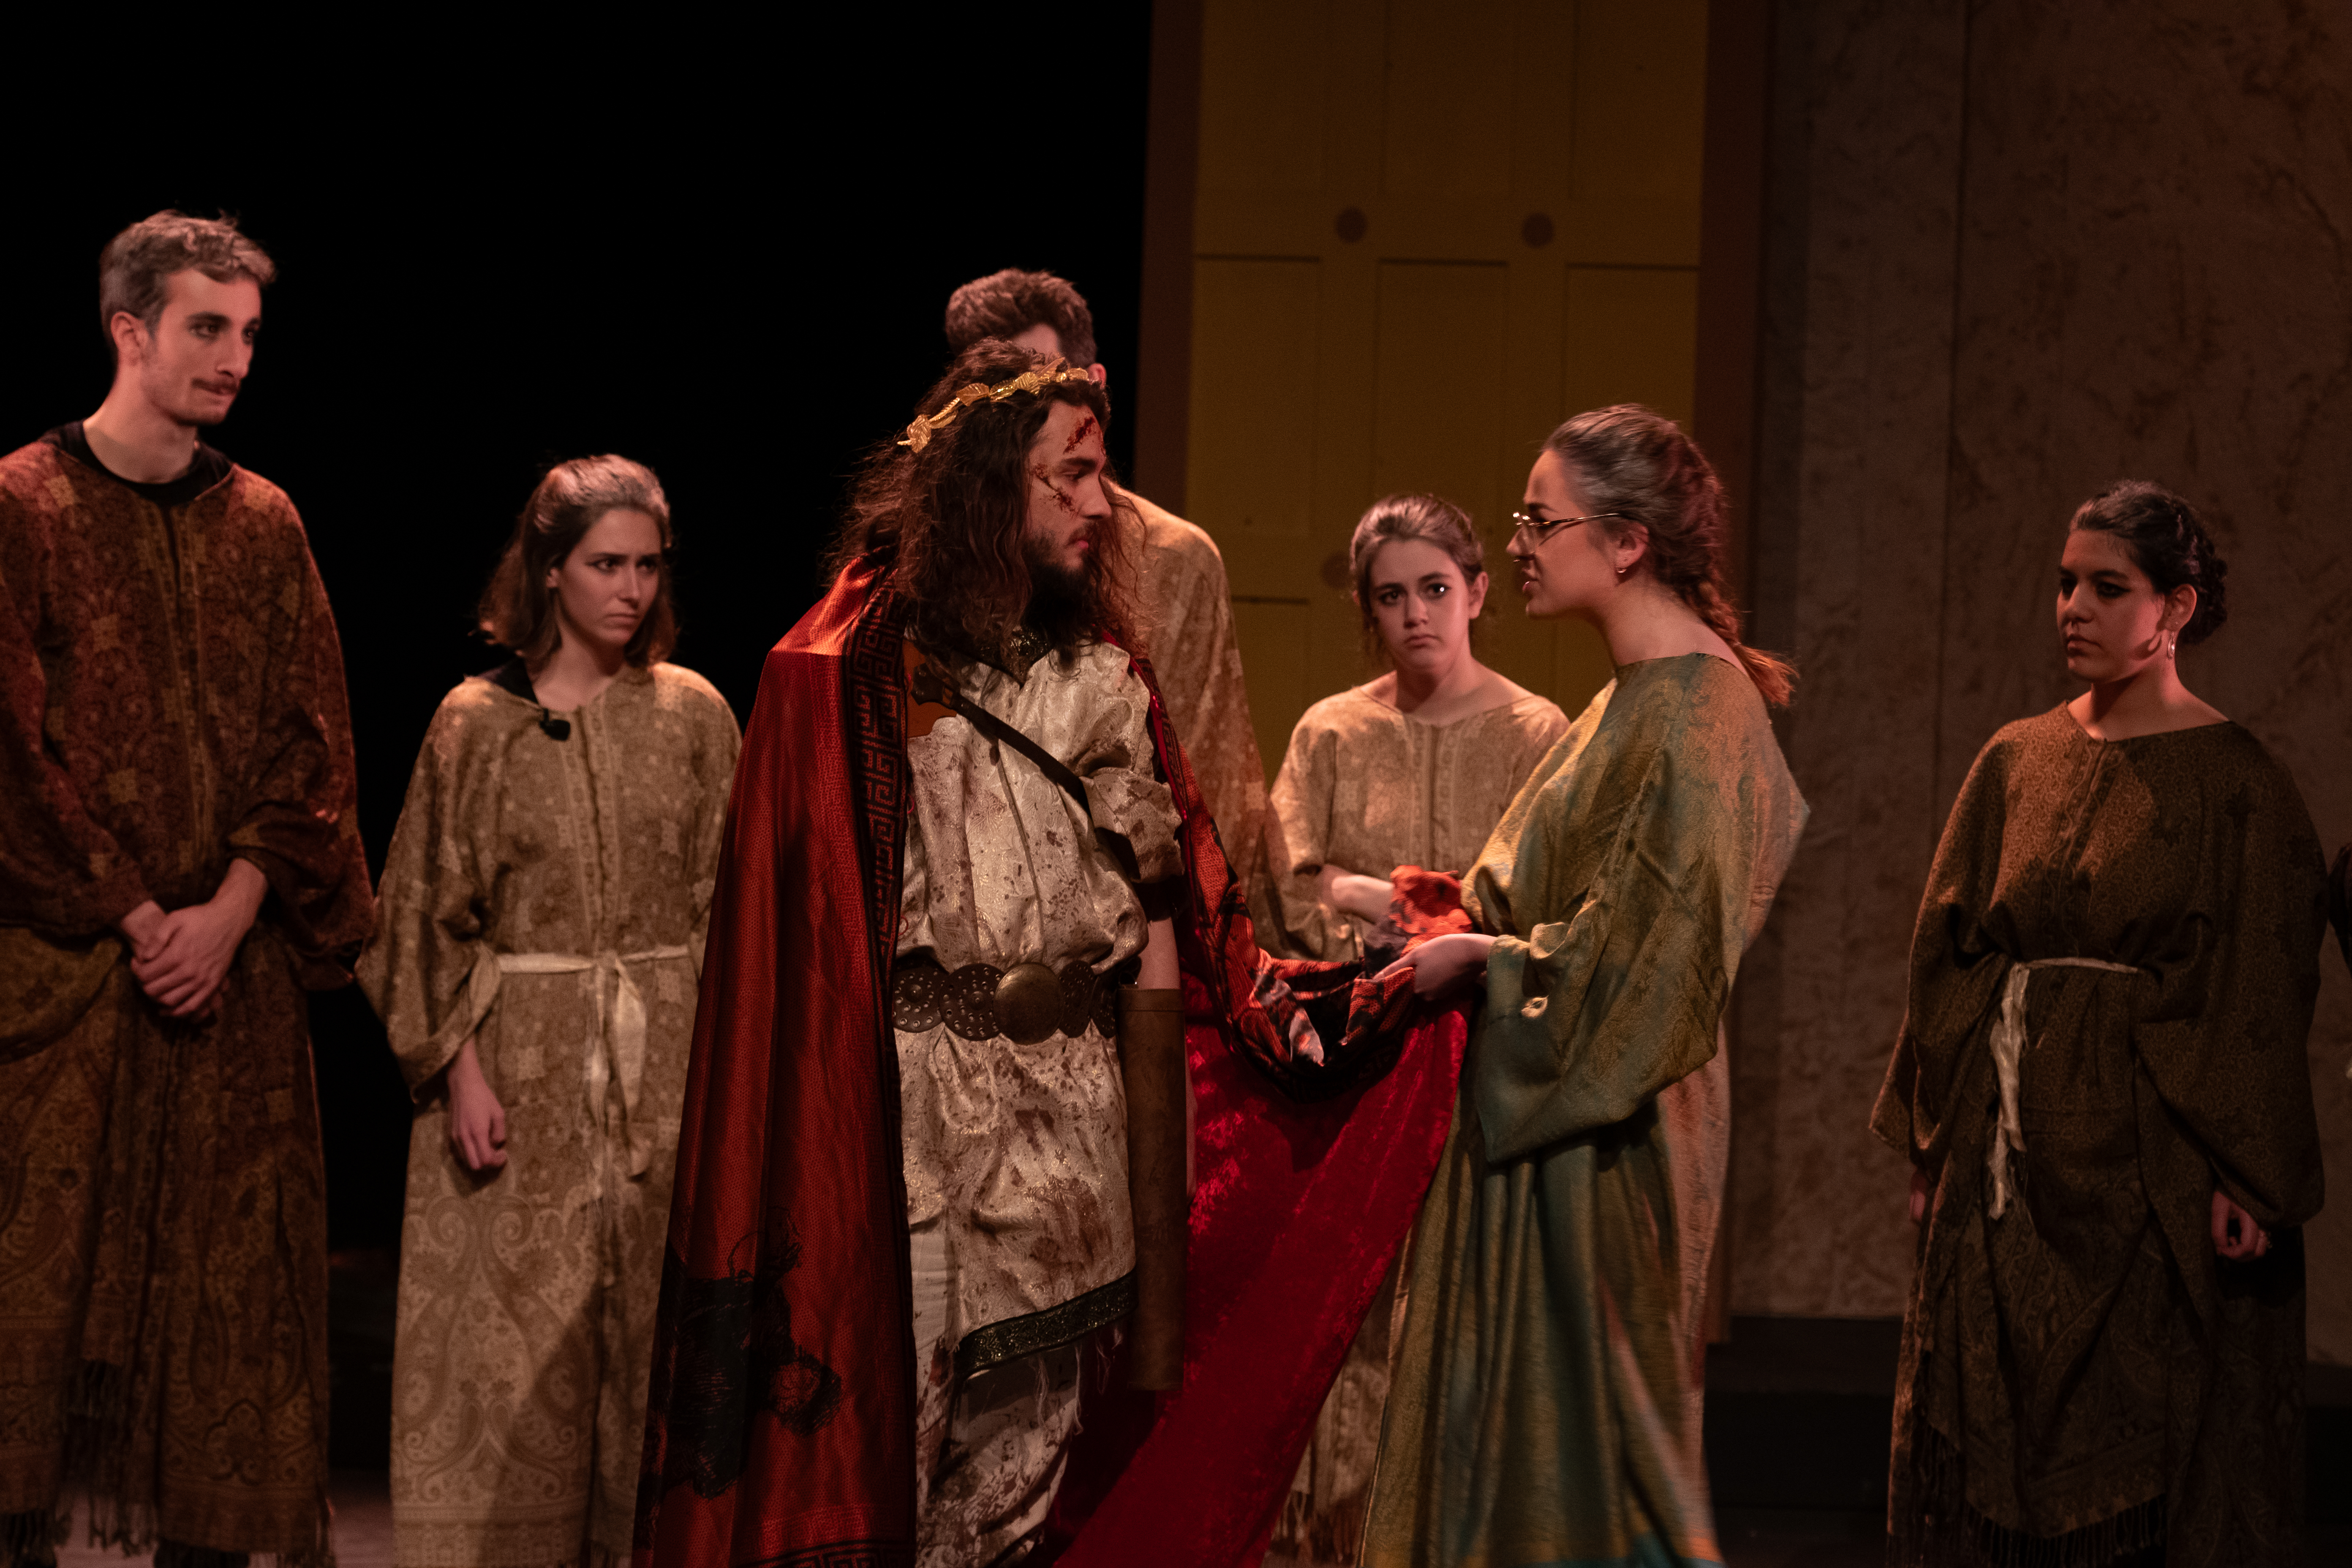 The chorus interrogating King Xerxes, reading from the scenes of defeat on his cape.